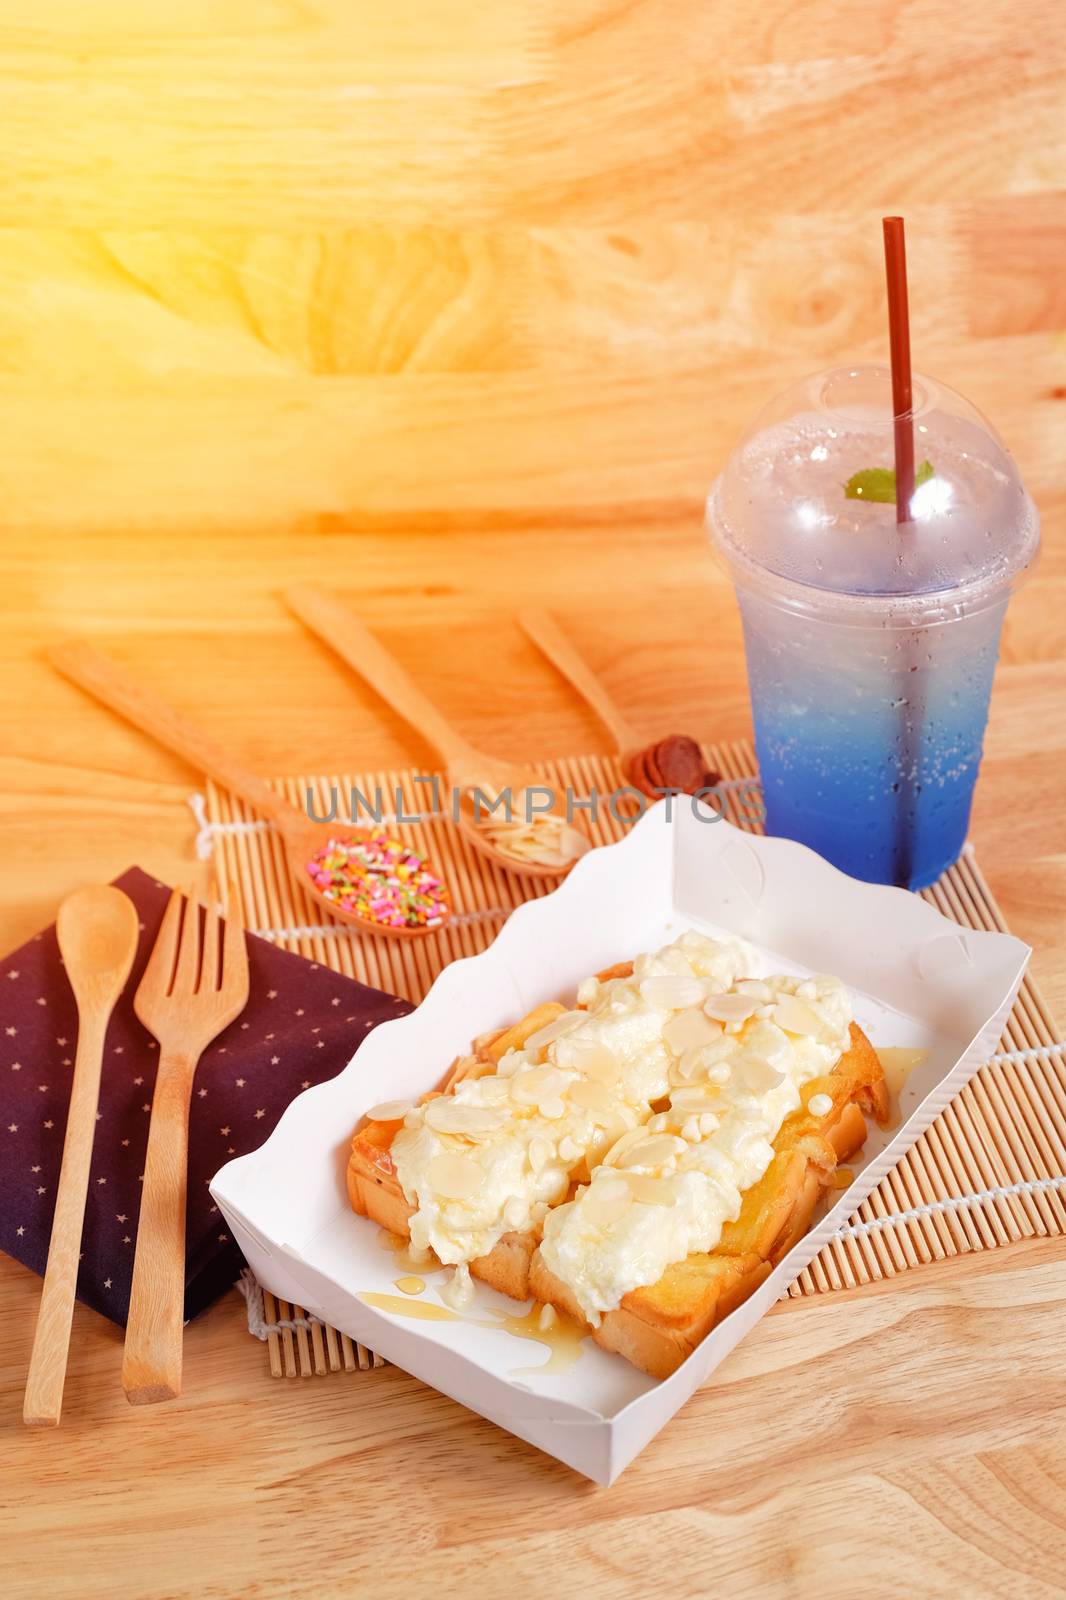 Toast butter with whip cream topping on wood background by Surasak